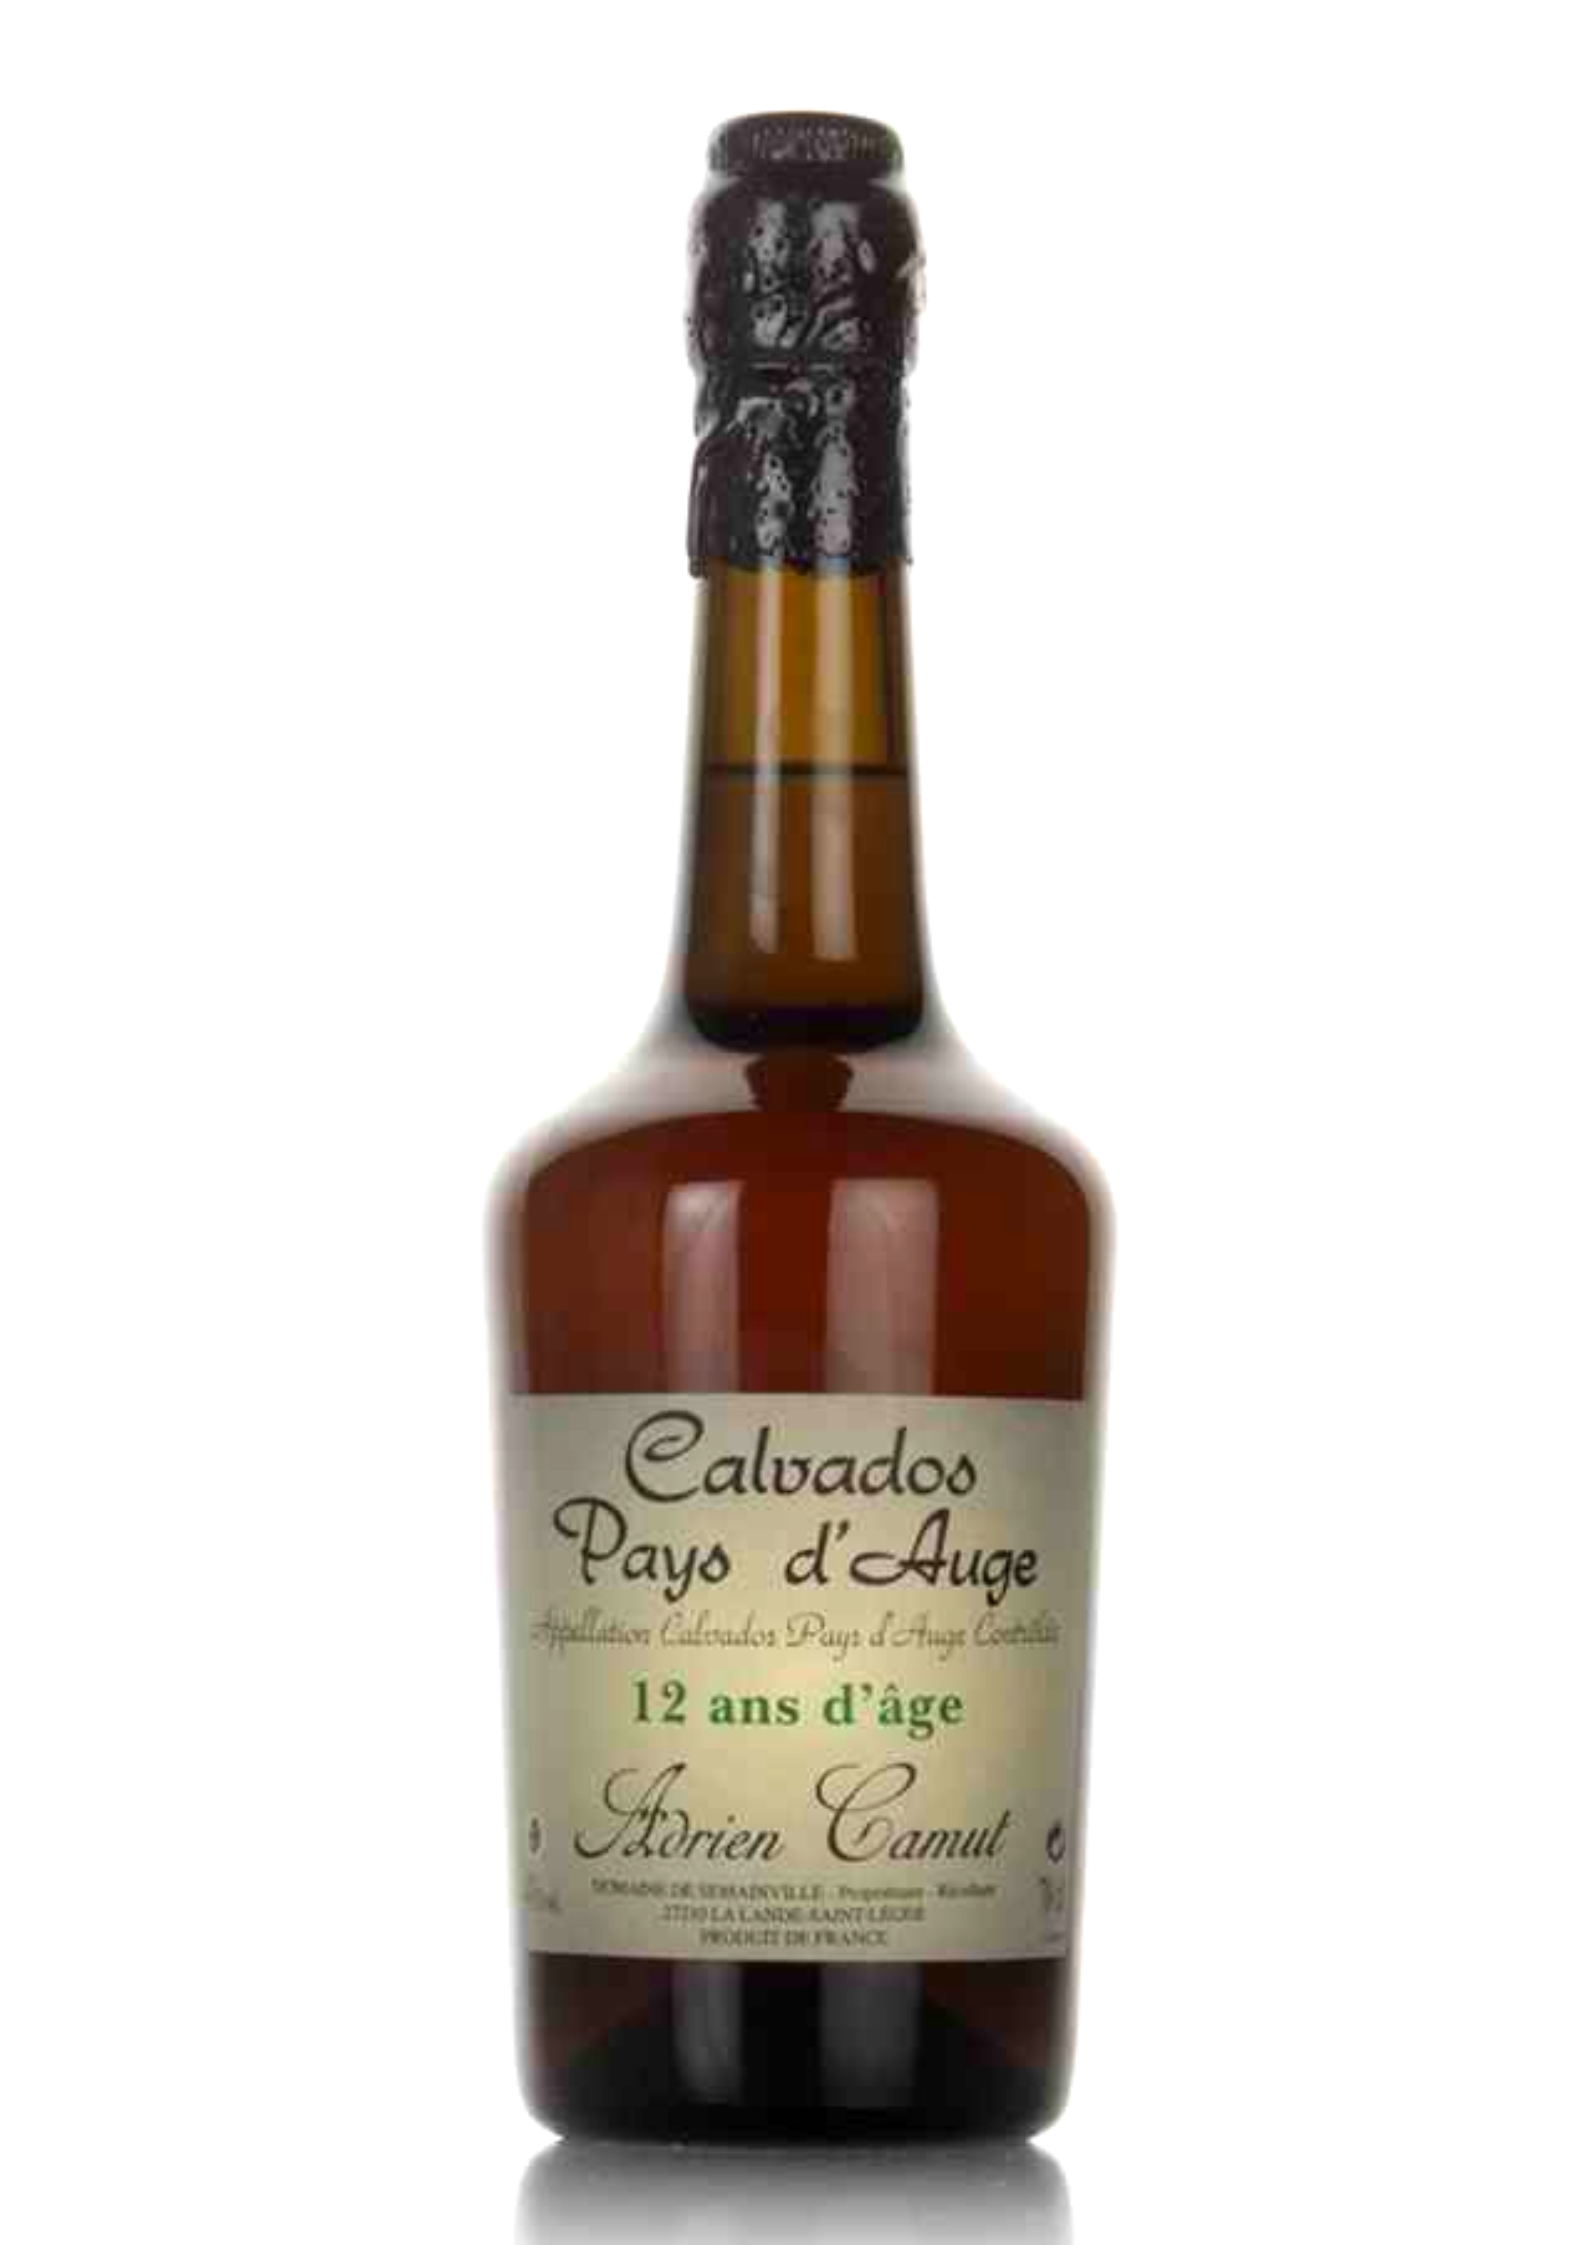 Bottle of Calvados Adrien Camut 12 Ans d'Age, 41% - The Spirits Room